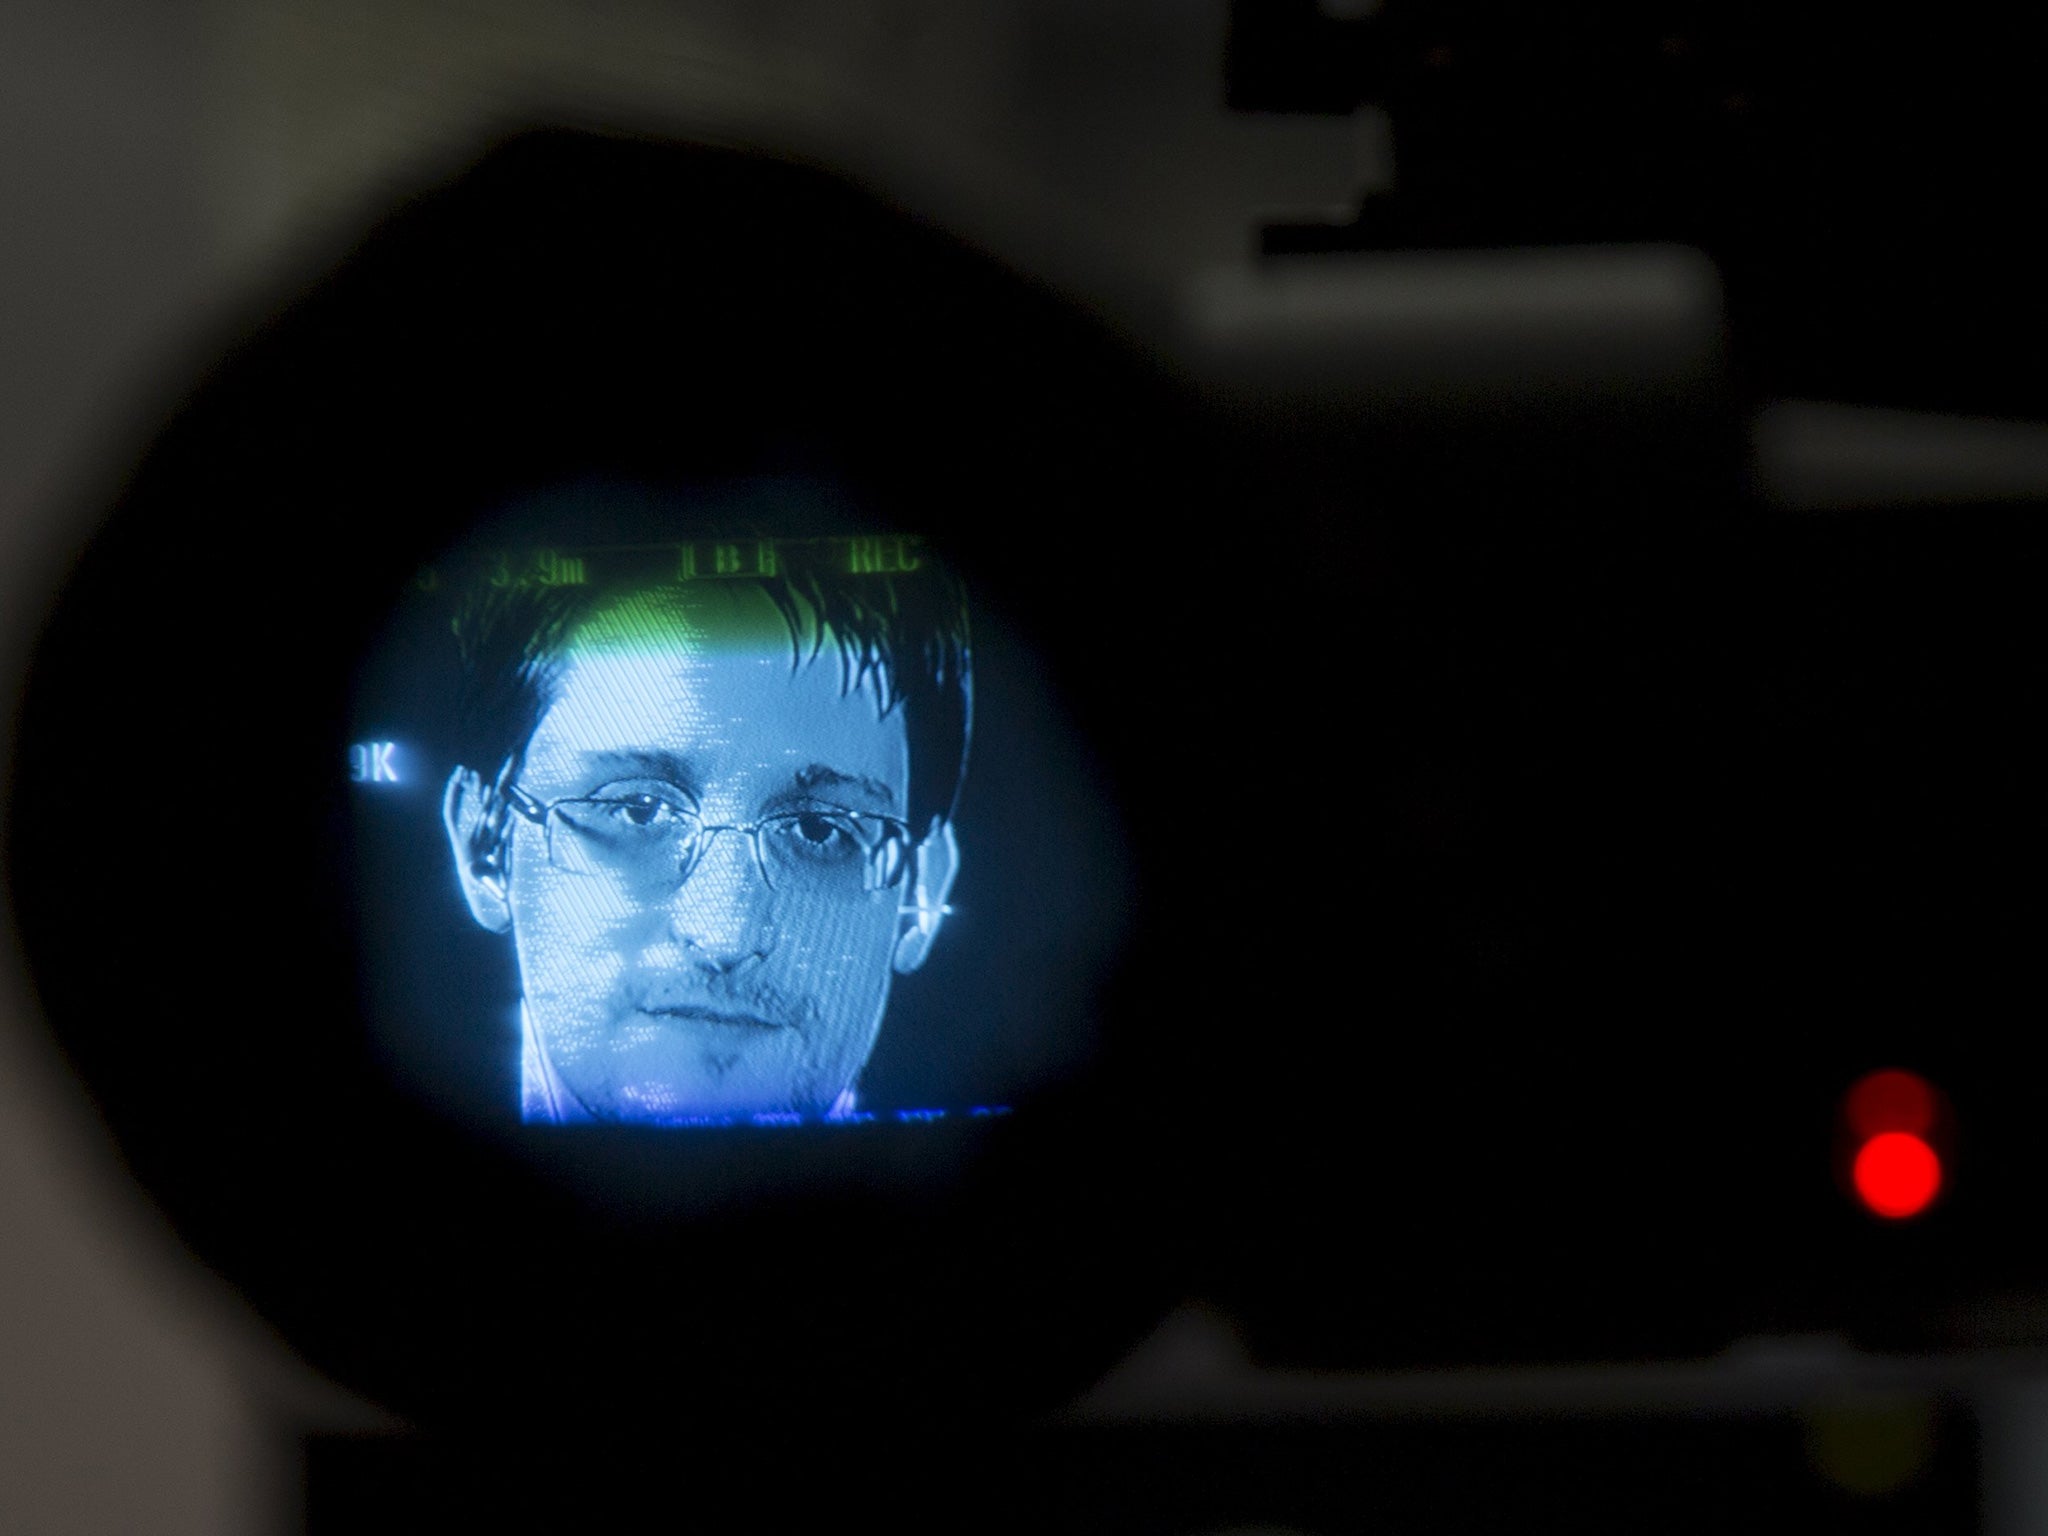 The former CIA Director, Michael Hayden, named Edward Snowden as one of the worst cases of 'millennial treachery'